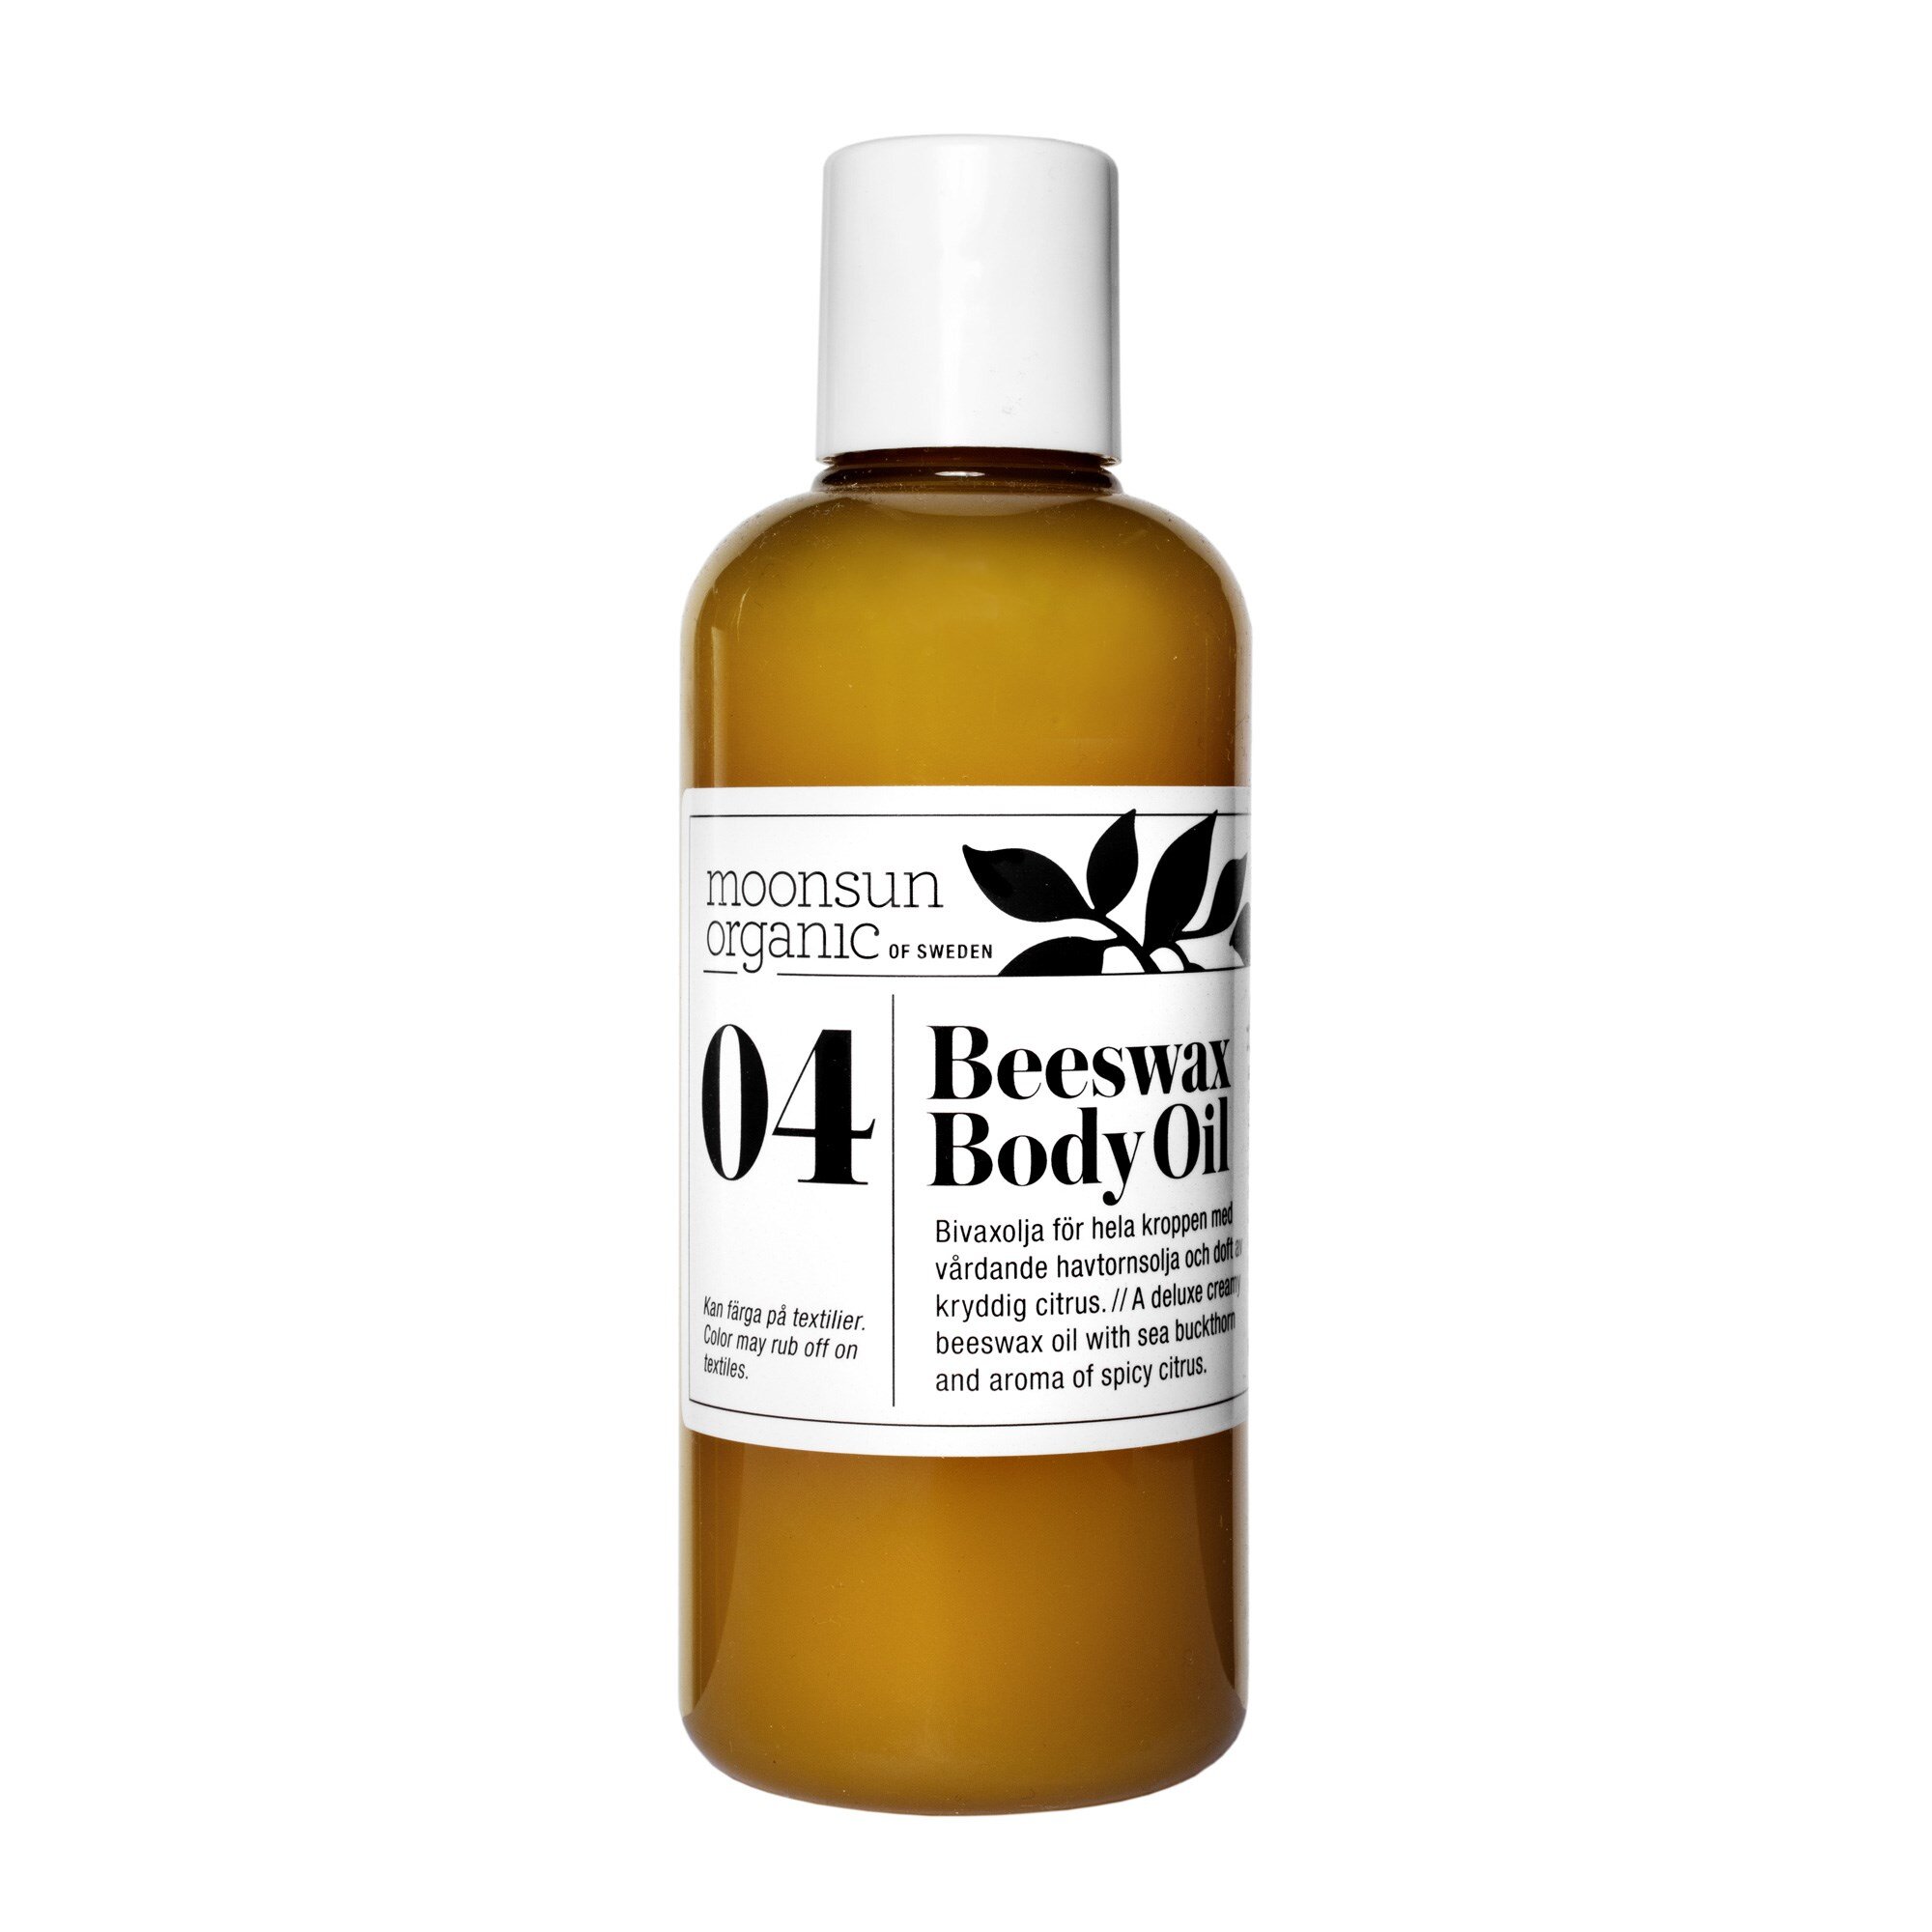 Beeswax Body Oil